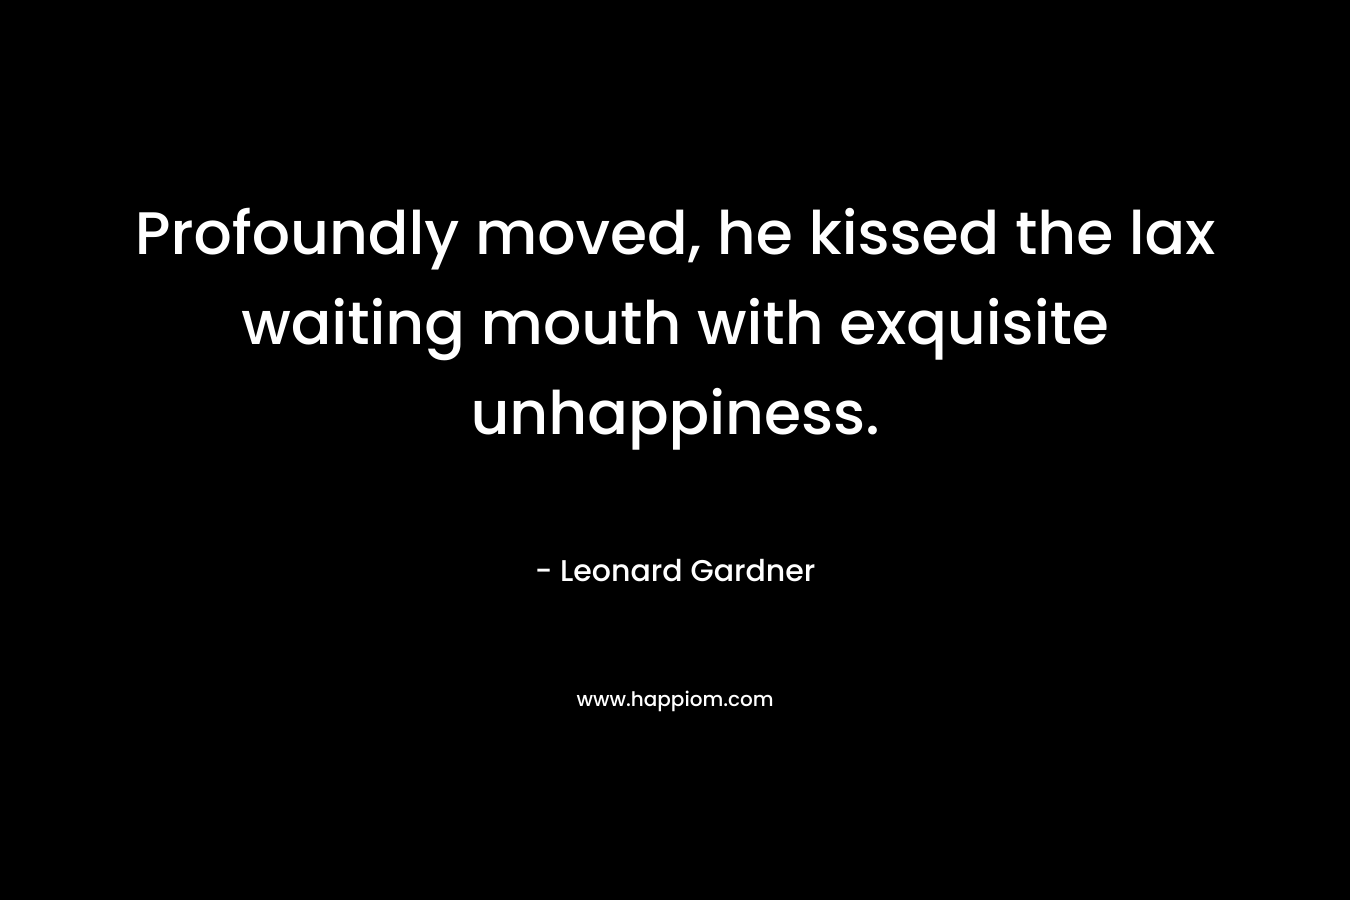 Profoundly moved, he kissed the lax waiting mouth with exquisite unhappiness. – Leonard Gardner